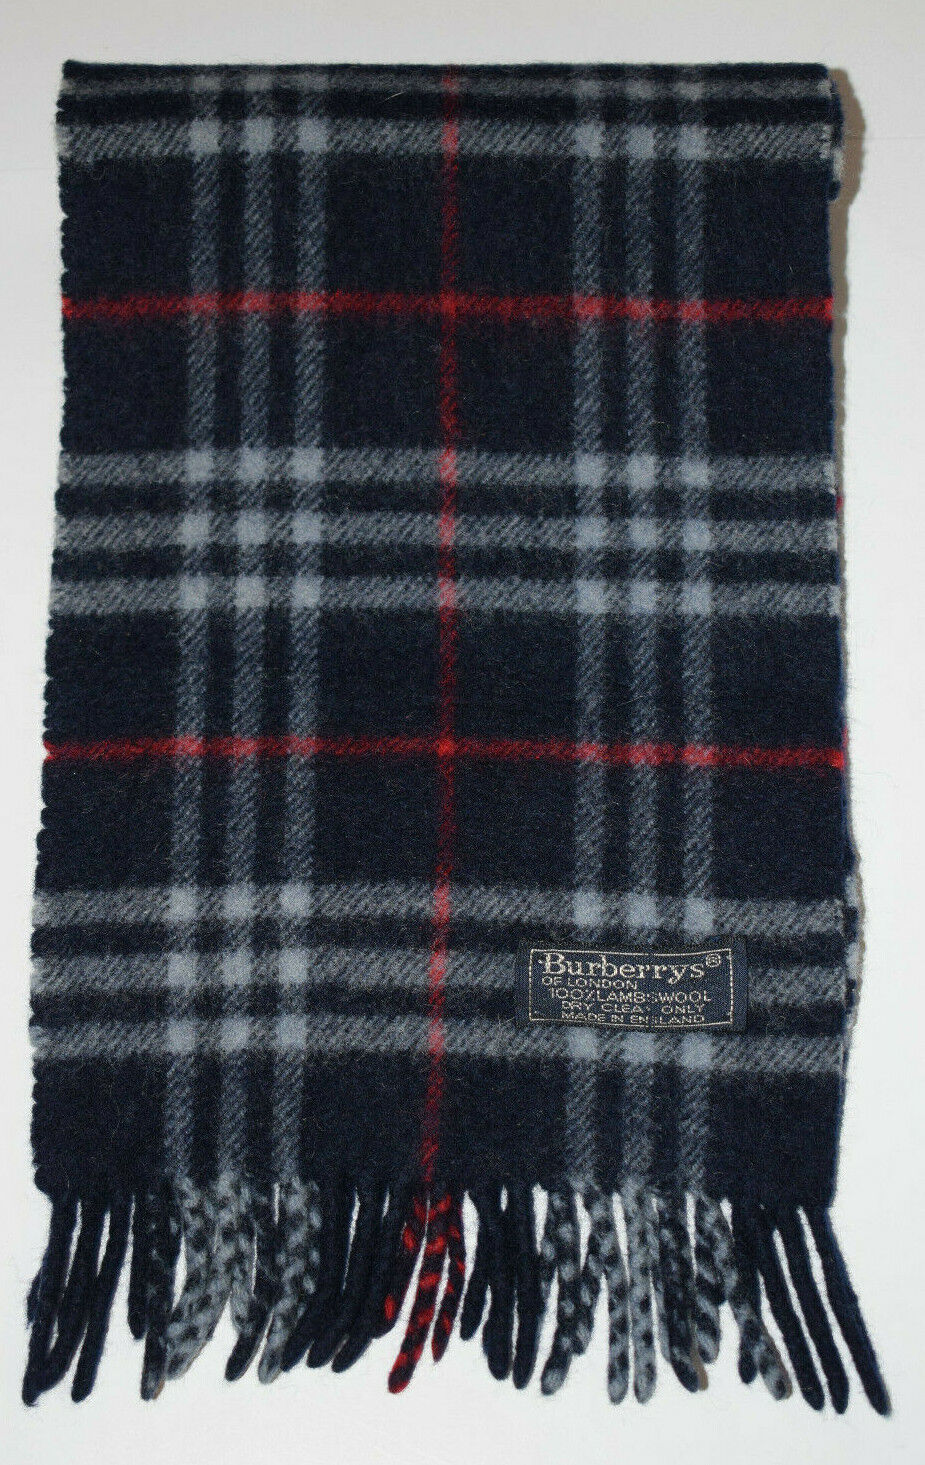 Burberry Scarf Classic Nova Check Lambswool in Blue and Red Color Unisex